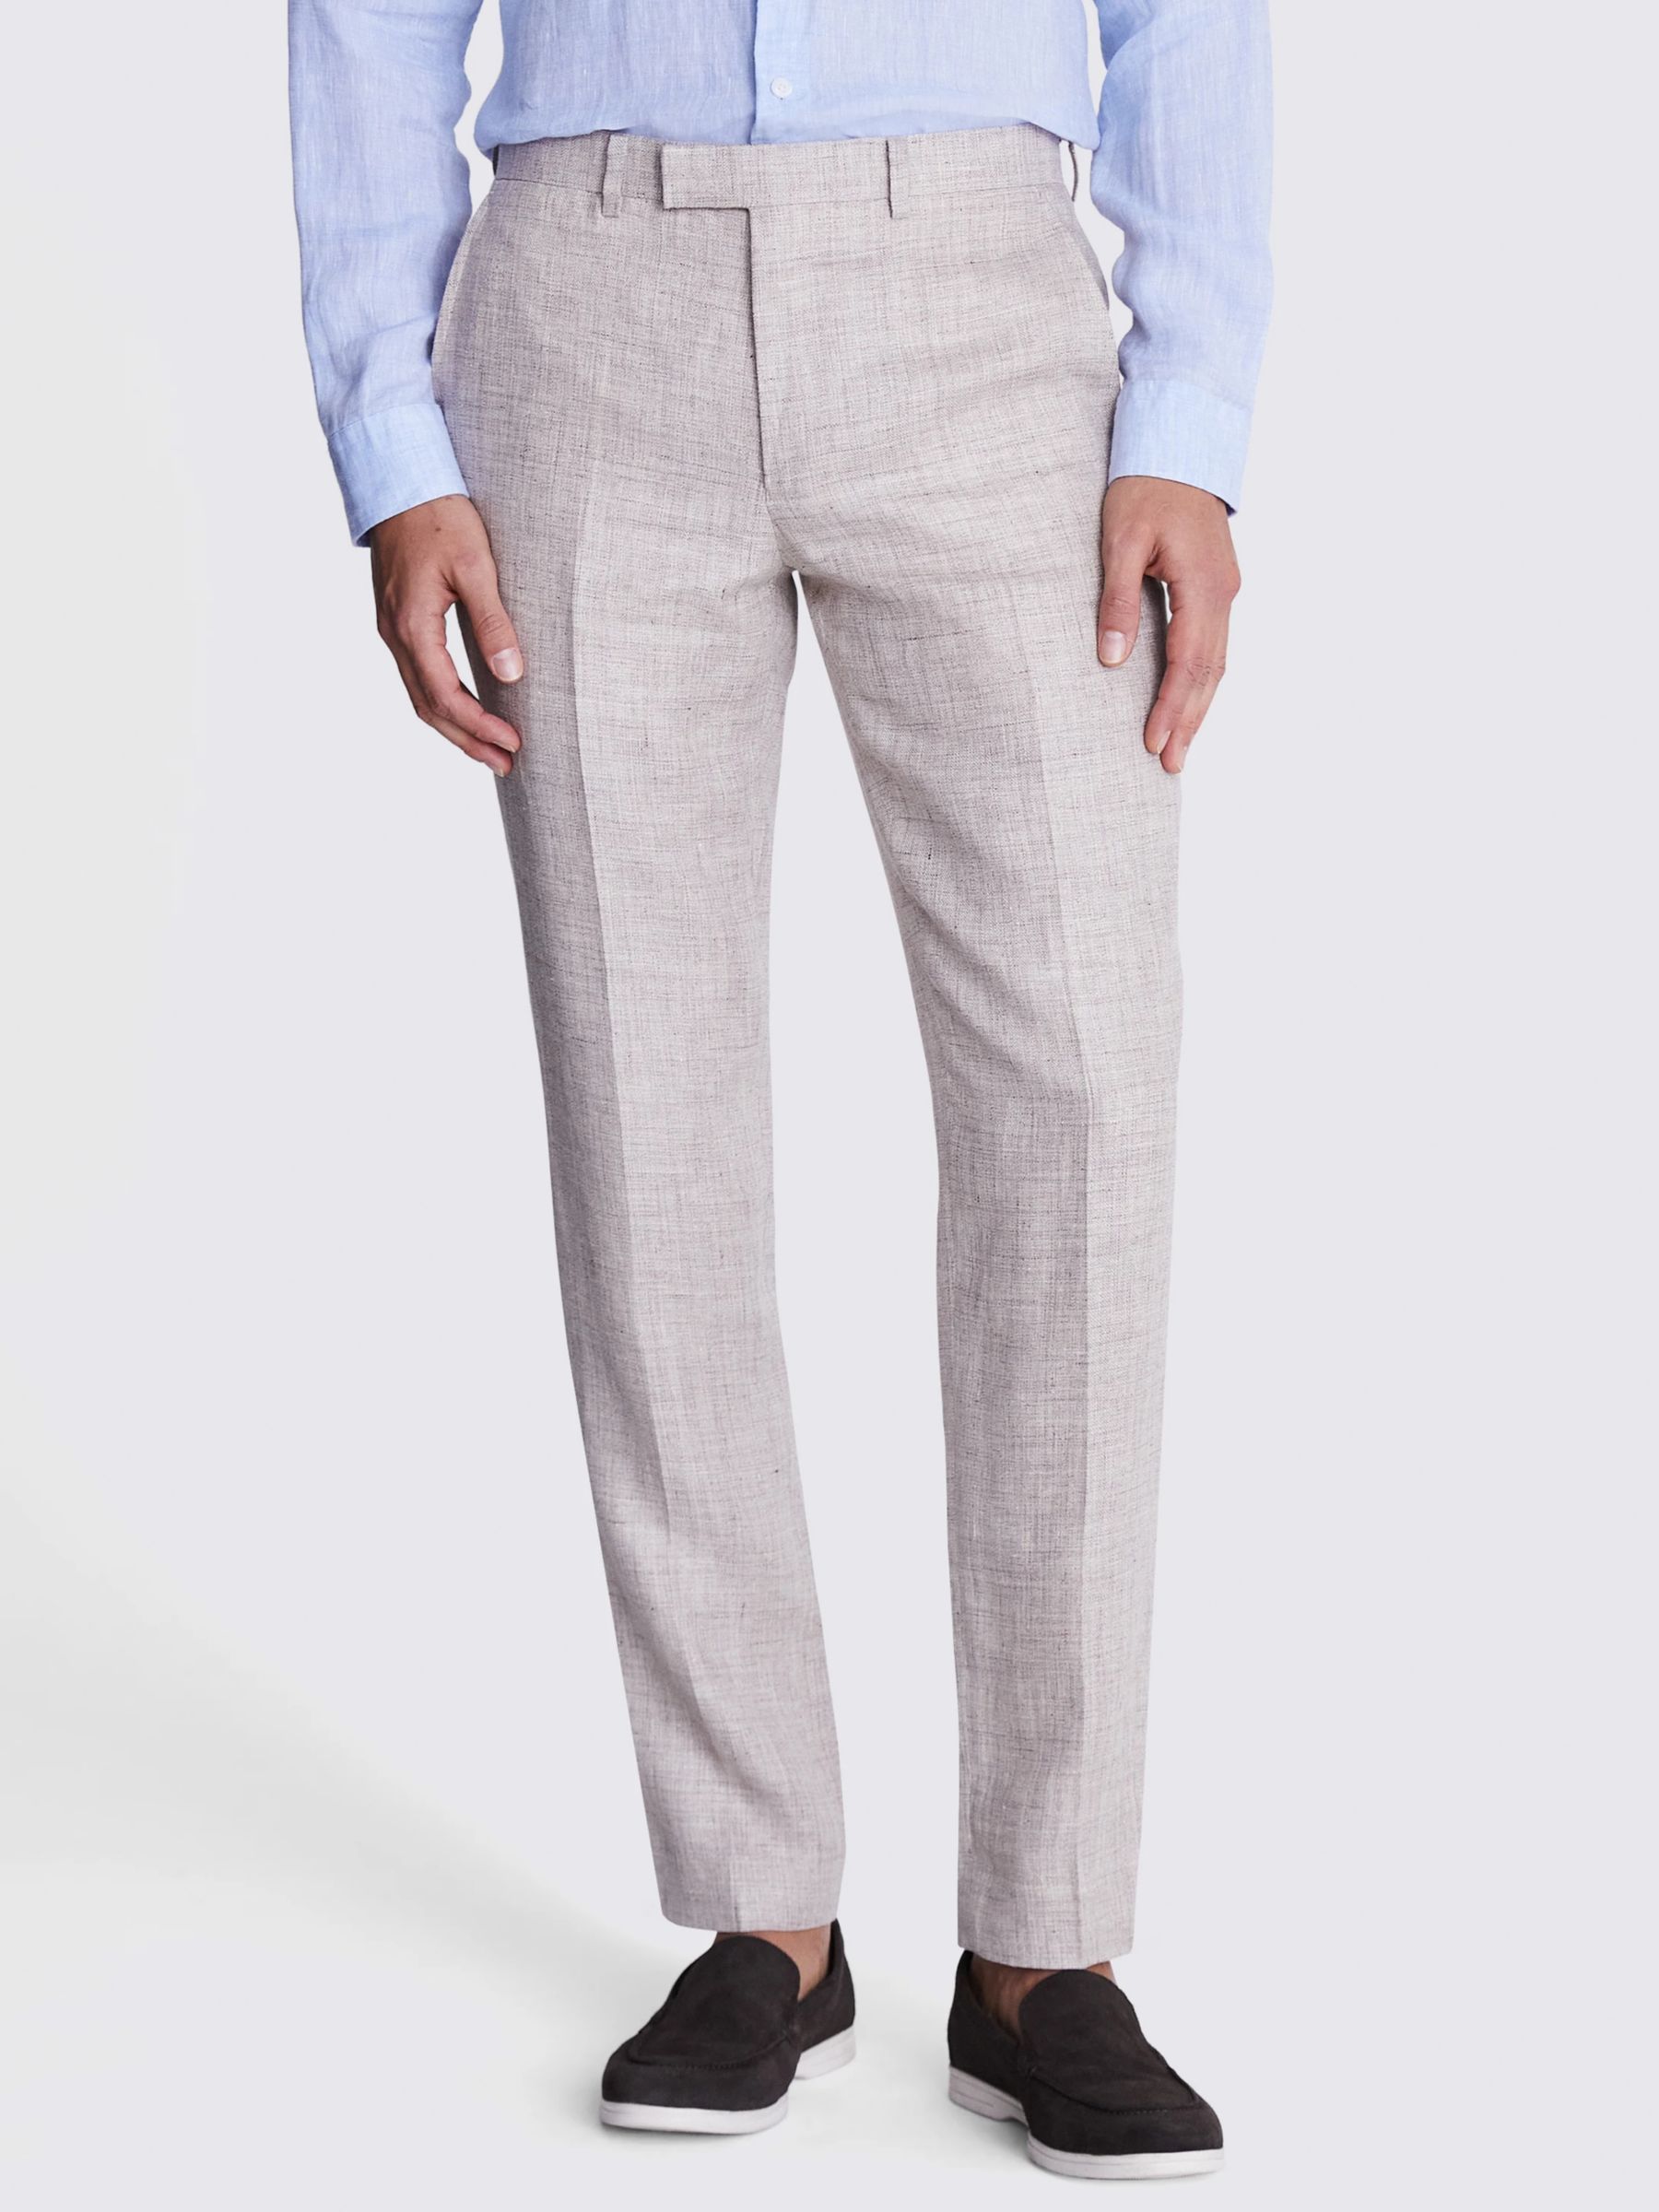 Moss 1851 Tailored Fit Linen Trousers, Oatmeal at John Lewis & Partners